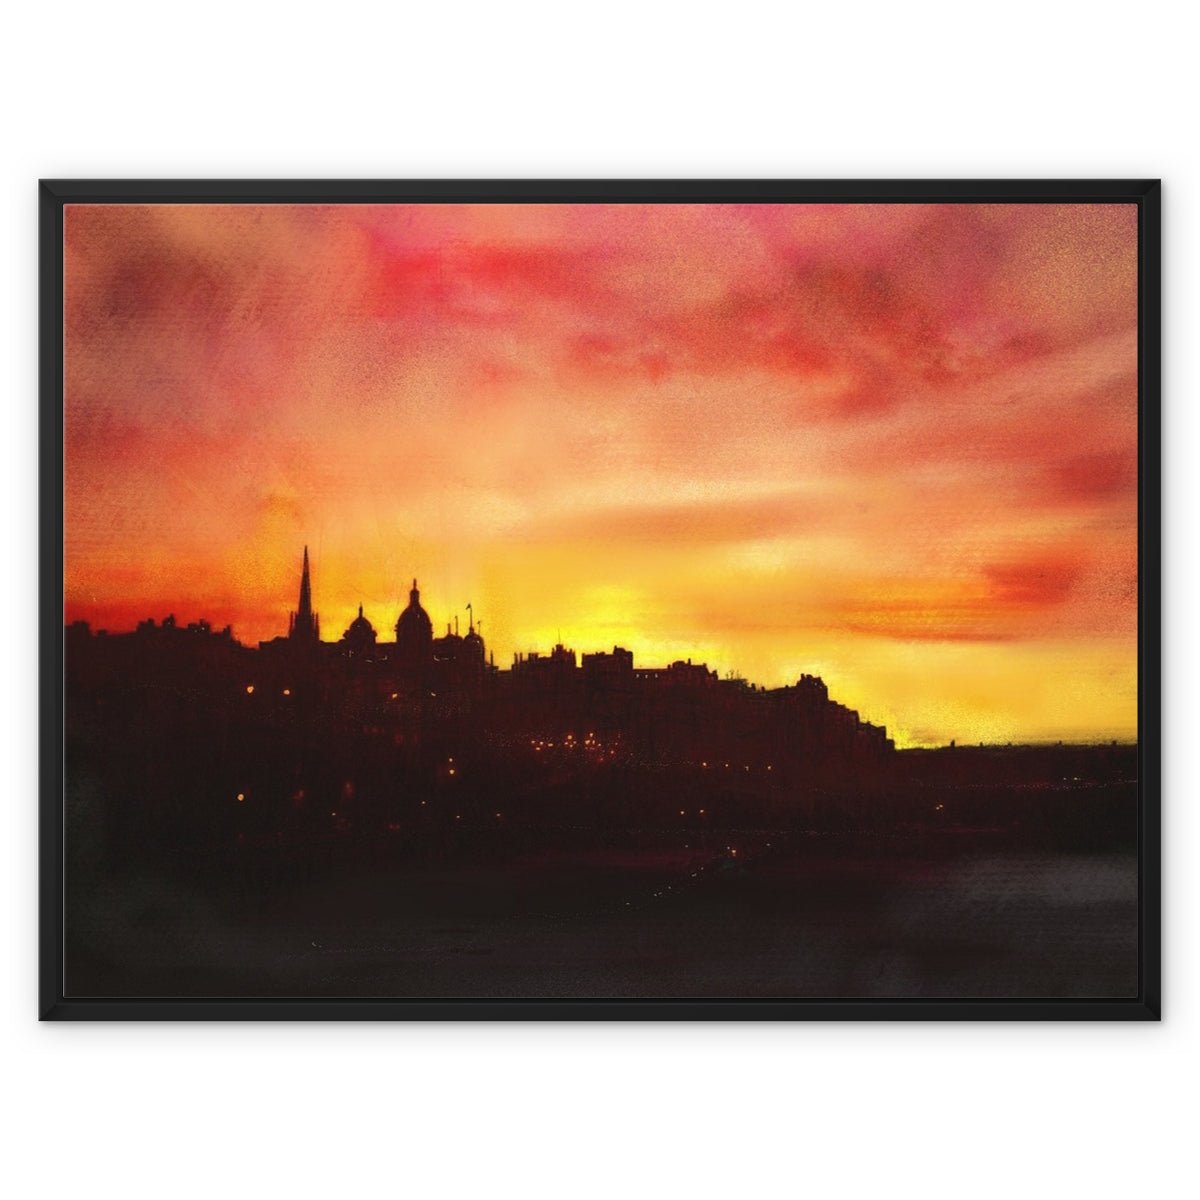 Edinburgh Sunset Painting | Framed Canvas From Scotland-Floating Framed Canvas Prints-Edinburgh & Glasgow Art Gallery-32"x24"-Black Frame-Paintings, Prints, Homeware, Art Gifts From Scotland By Scottish Artist Kevin Hunter